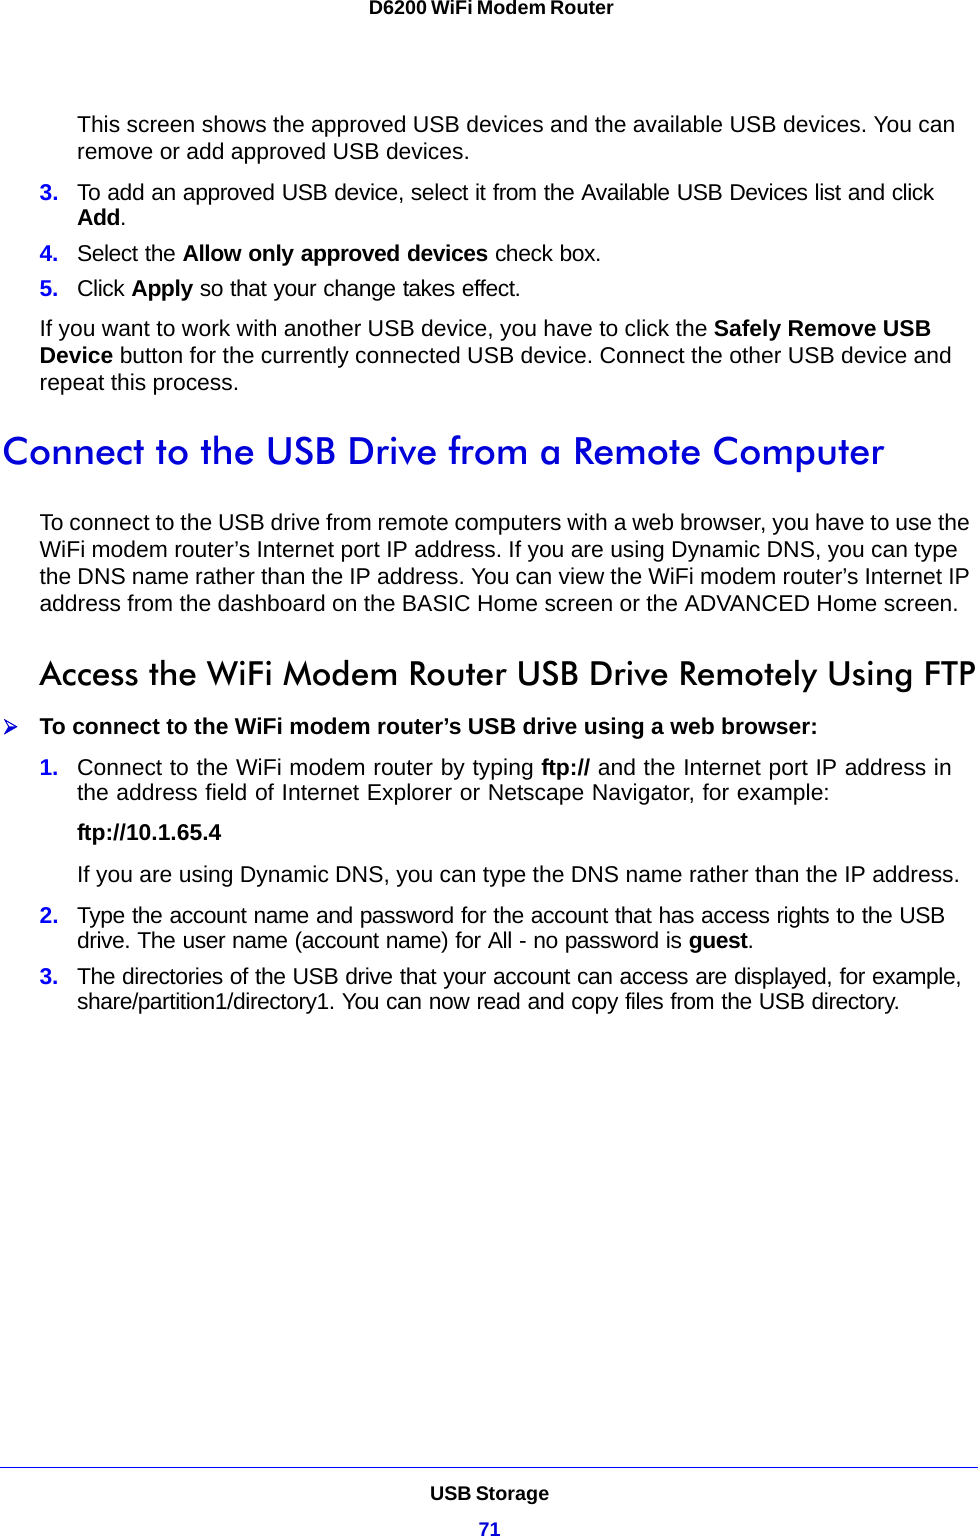 USB Storage71 D6200 WiFi Modem RouterThis screen shows the approved USB devices and the available USB devices. You can remove or add approved USB devices.3. To add an approved USB device, select it from the Available USB Devices list and click Add.4. Select the Allow only approved devices check box.5. Click Apply so that your change takes effect.If you want to work with another USB device, you have to click the Safely Remove USB Device button for the currently connected USB device. Connect the other USB device and repeat this process.Connect to the USB Drive from a Remote ComputerTo connect to the USB drive from remote computers with a web browser, you have to use the WiFi modem router’s Internet port IP address. If you are using Dynamic DNS, you can type the DNS name rather than the IP address. You can view the WiFi modem router’s Internet IP address from the dashboard on the BASIC Home screen or the ADVANCED Home screen.Access the WiFi Modem Router USB Drive Remotely Using FTPTo connect to the WiFi modem router’s USB drive using a web browser:1. Connect to the WiFi modem router by typing ftp:// and the Internet port IP address in the address field of Internet Explorer or Netscape Navigator, for example:ftp://10.1.65.4 If you are using Dynamic DNS, you can type the DNS name rather than the IP address.2. Type the account name and password for the account that has access rights to the USB drive. The user name (account name) for All - no password is guest.3. The directories of the USB drive that your account can access are displayed, for example, share/partition1/directory1. You can now read and copy files from the USB directory.